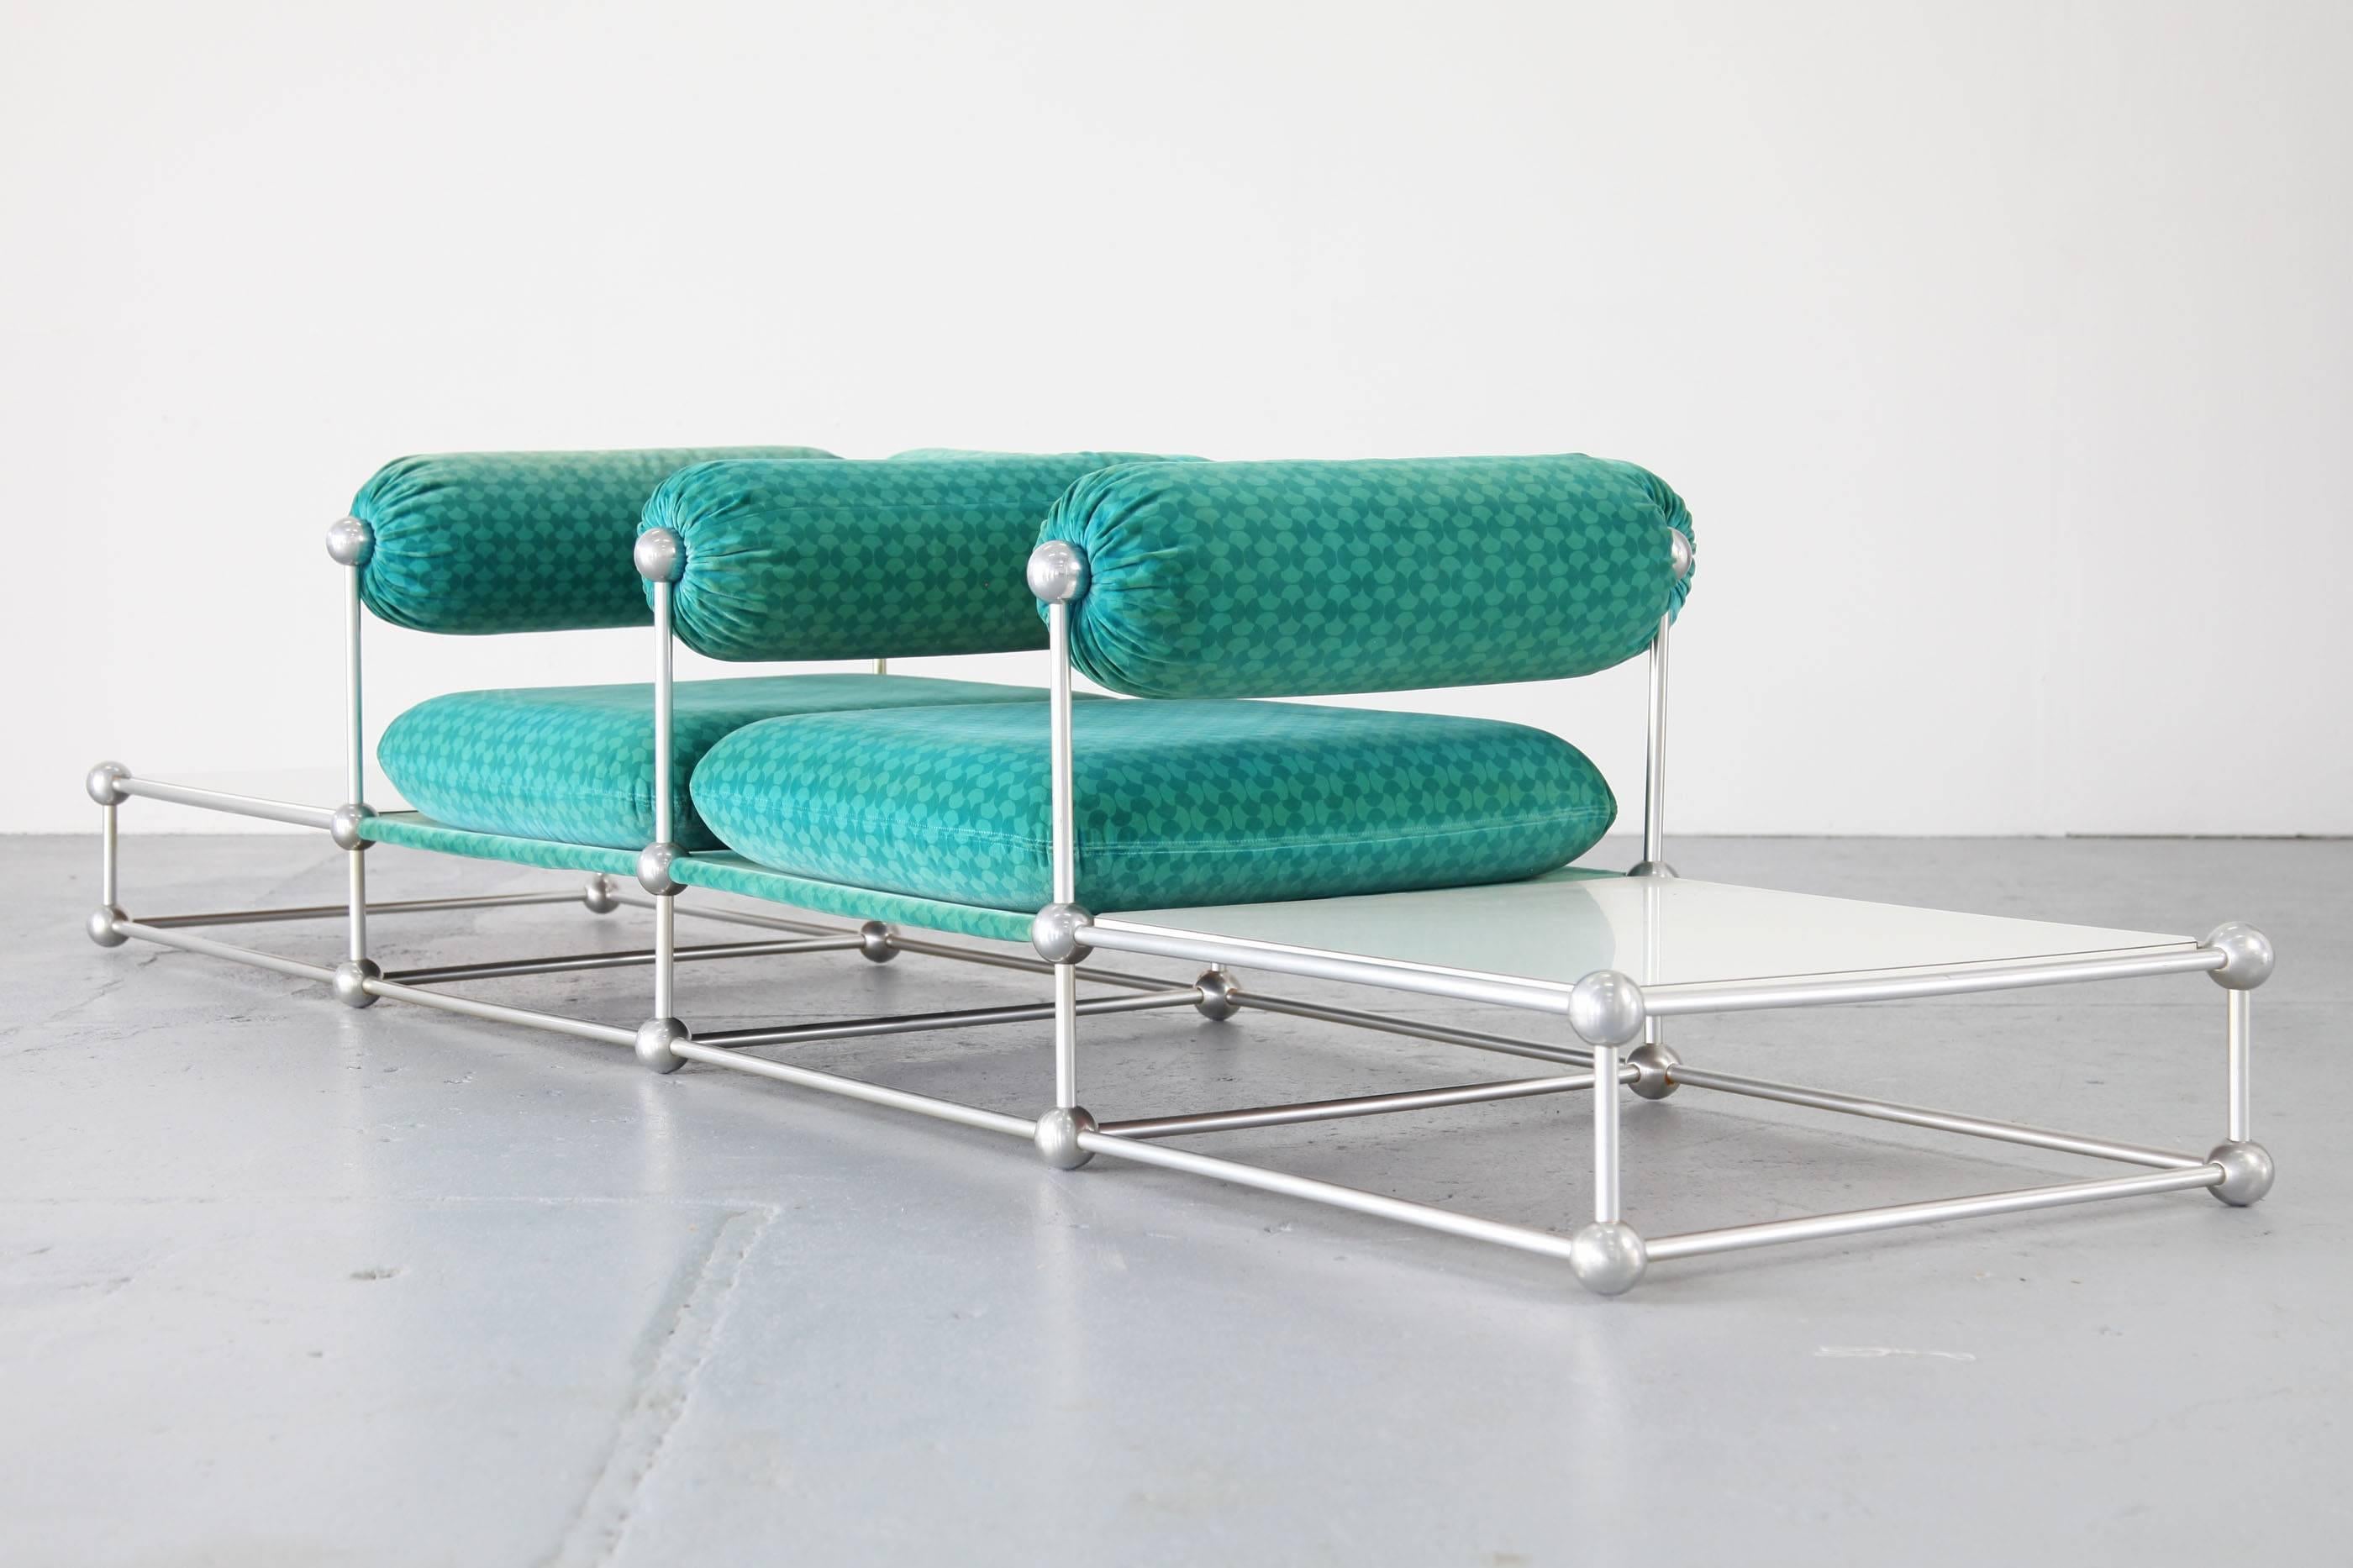 Mid-Century Modern Two-Seat Sofa with Tables S420 Modular Seating by Verner Panton for Thonet